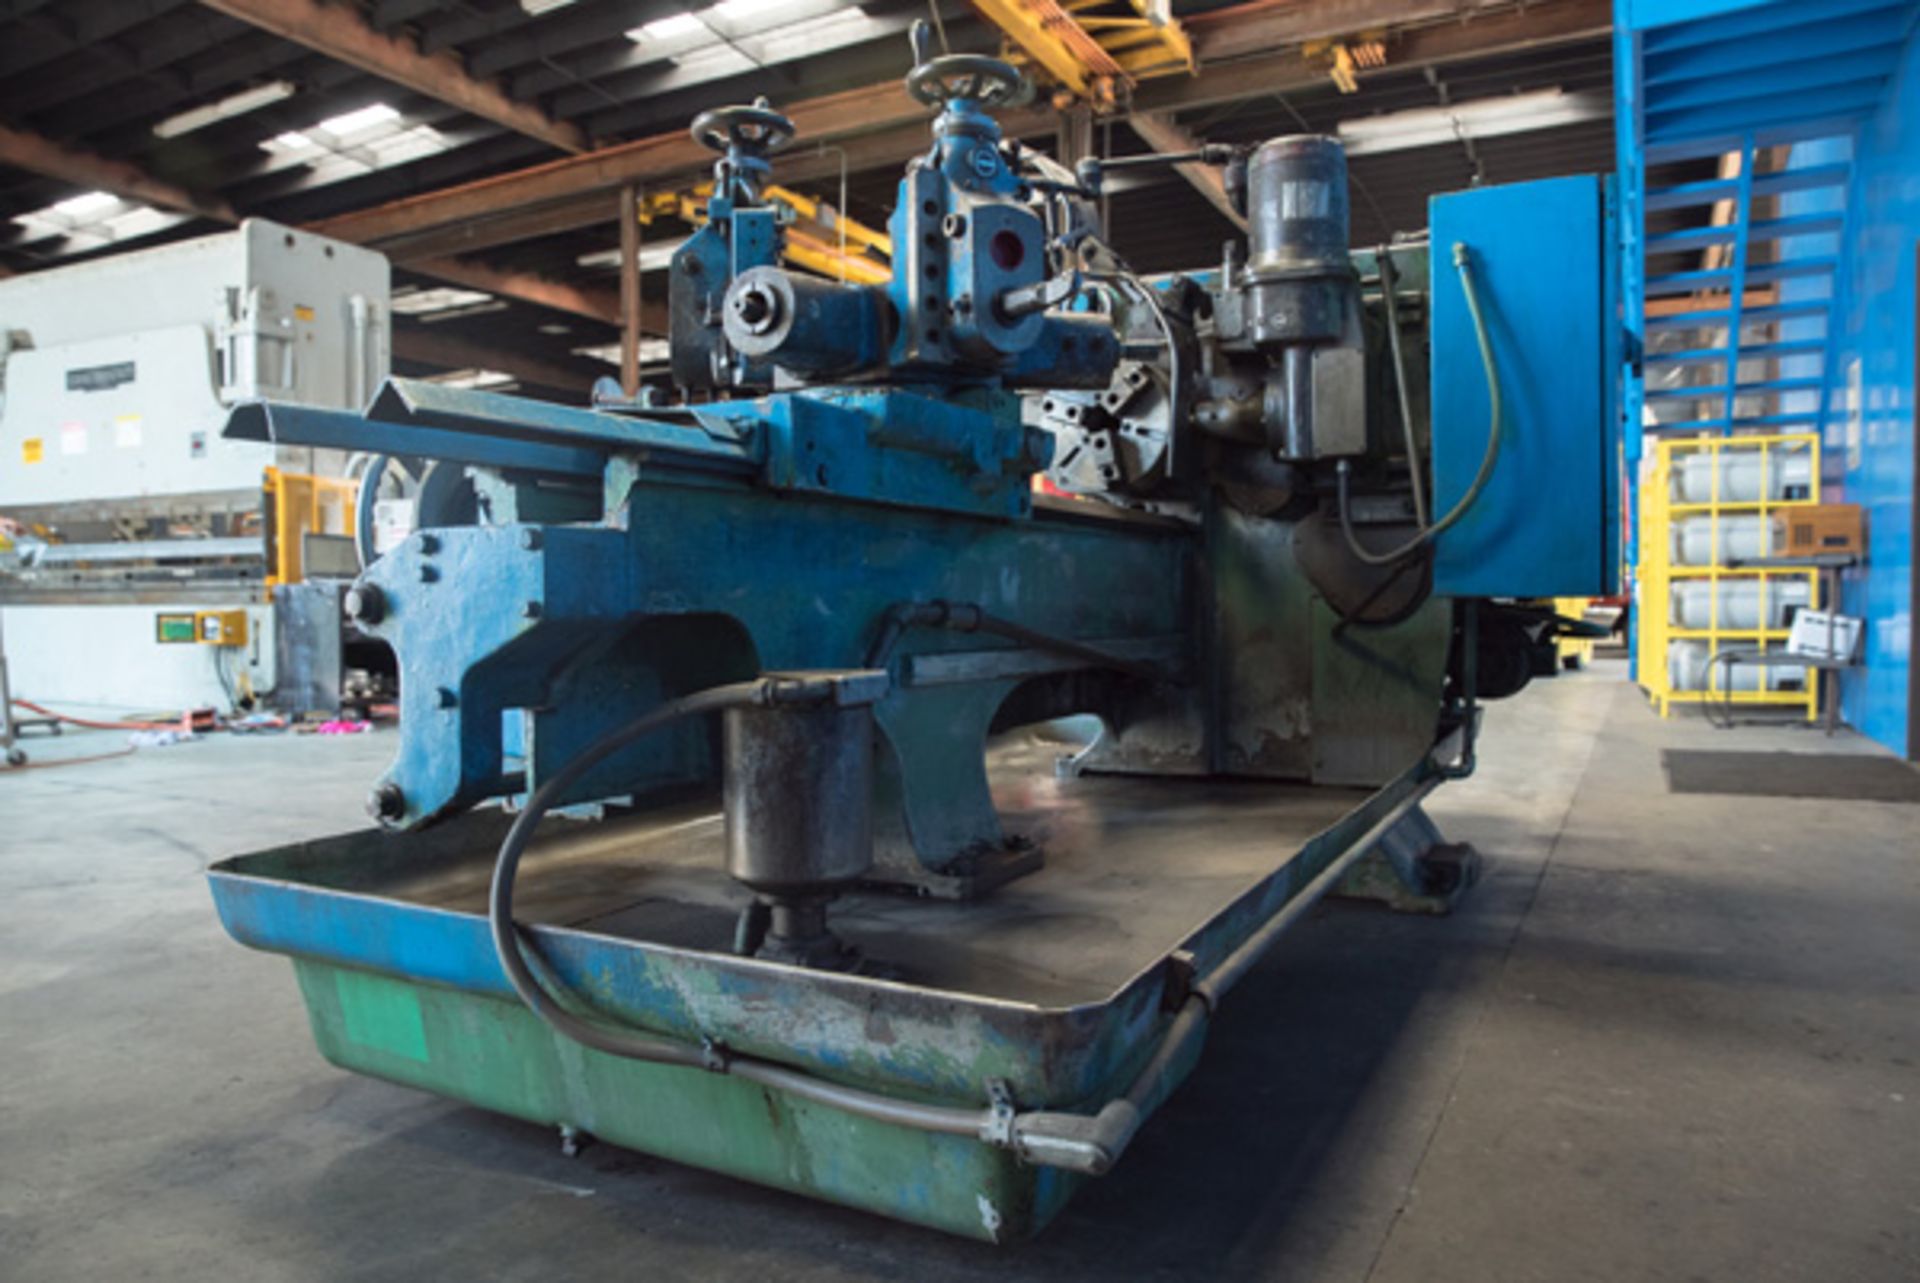 Warner & Swasey Turret Lathe | 18" x 32", Located In: Huntington Park, CA - 4552 - Image 12 of 14